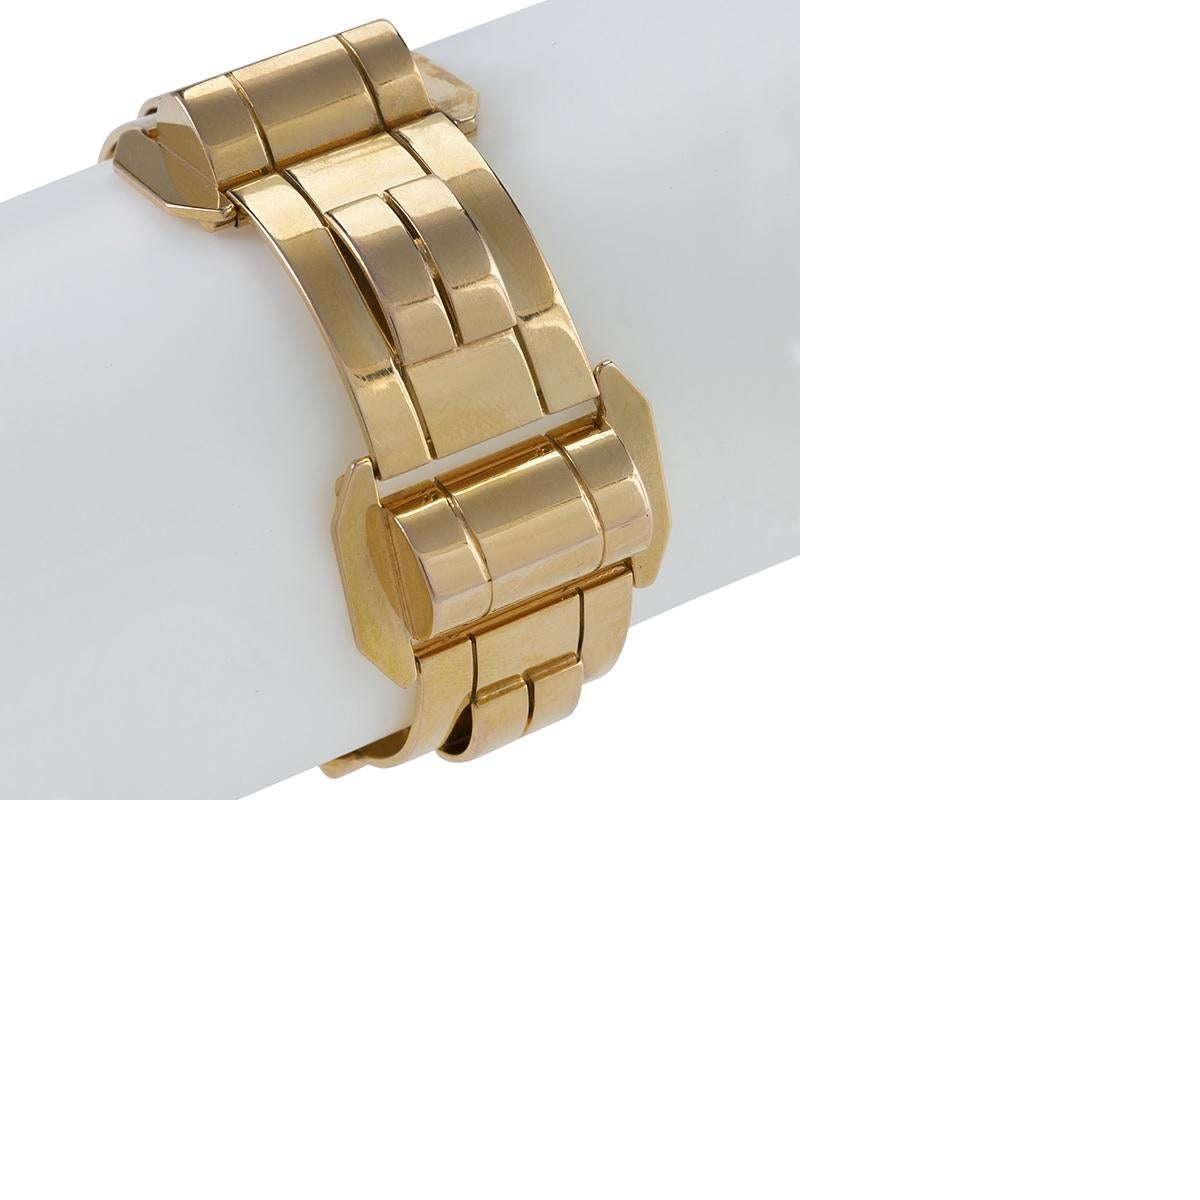 The highly polished geometry of this mid-20th century gold bracelet mesmerizes with its mirror-like surface and sleek minimalism. The repeating, architecturally-detailed motif of both horizontally- and vertically-oriented links is emblematic of the